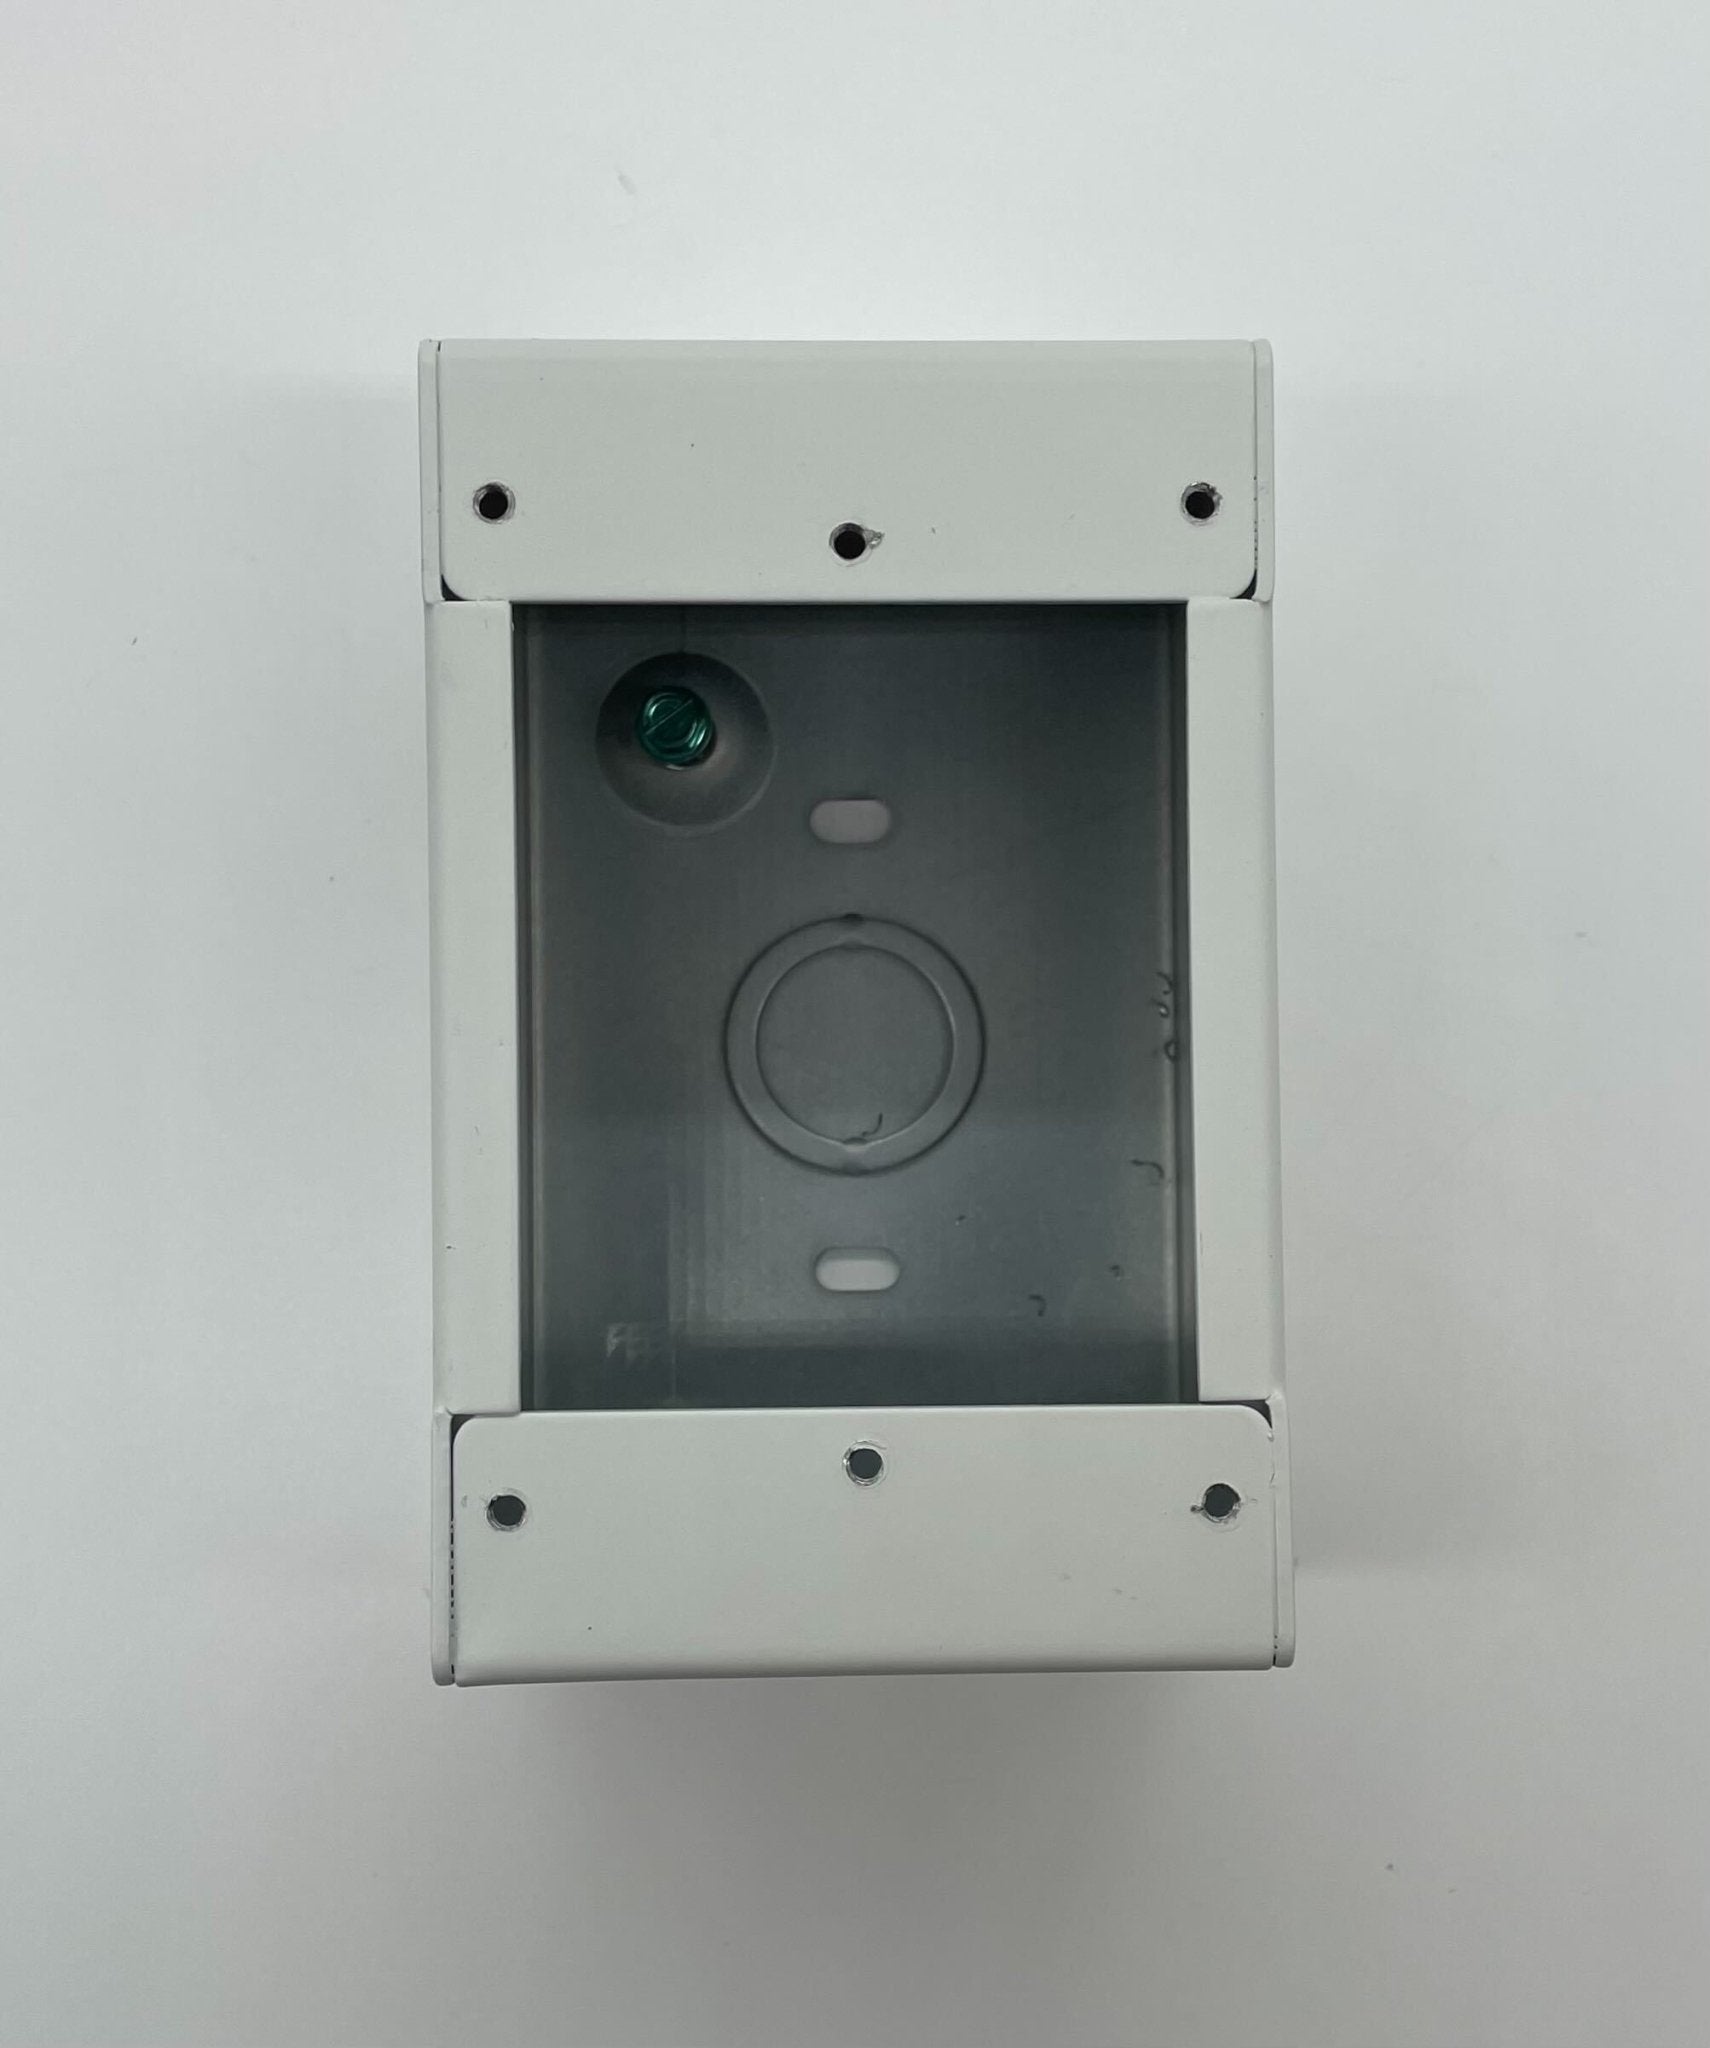 Edwards 27193-16 - The Fire Alarm Supplier